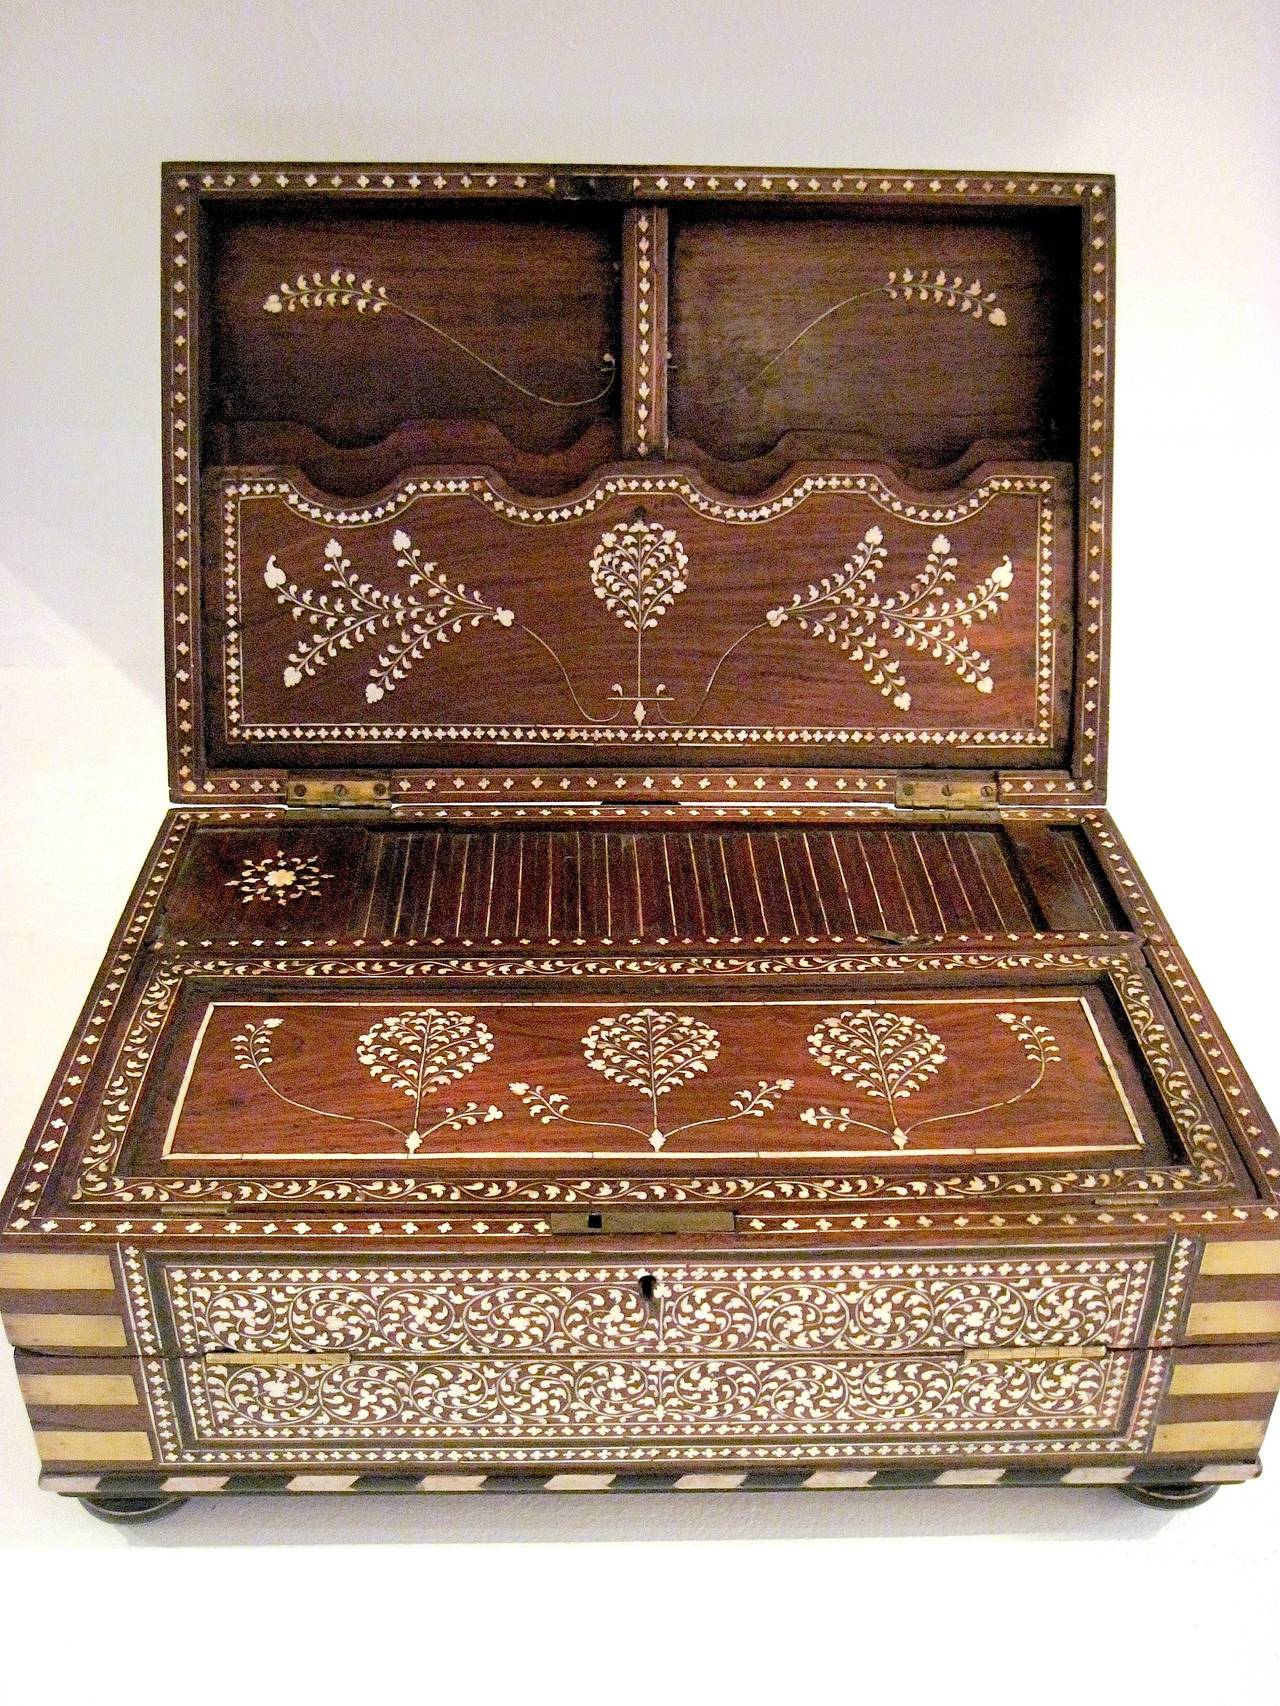 Elegant and finely crafted rosewood and ivory inlay traveller's writing desk from the late Mughal period of British India (circa 1825), on low bun feet. In excellent condition, with no missing inlay or damage. The exterior is lavishly inlaid on the